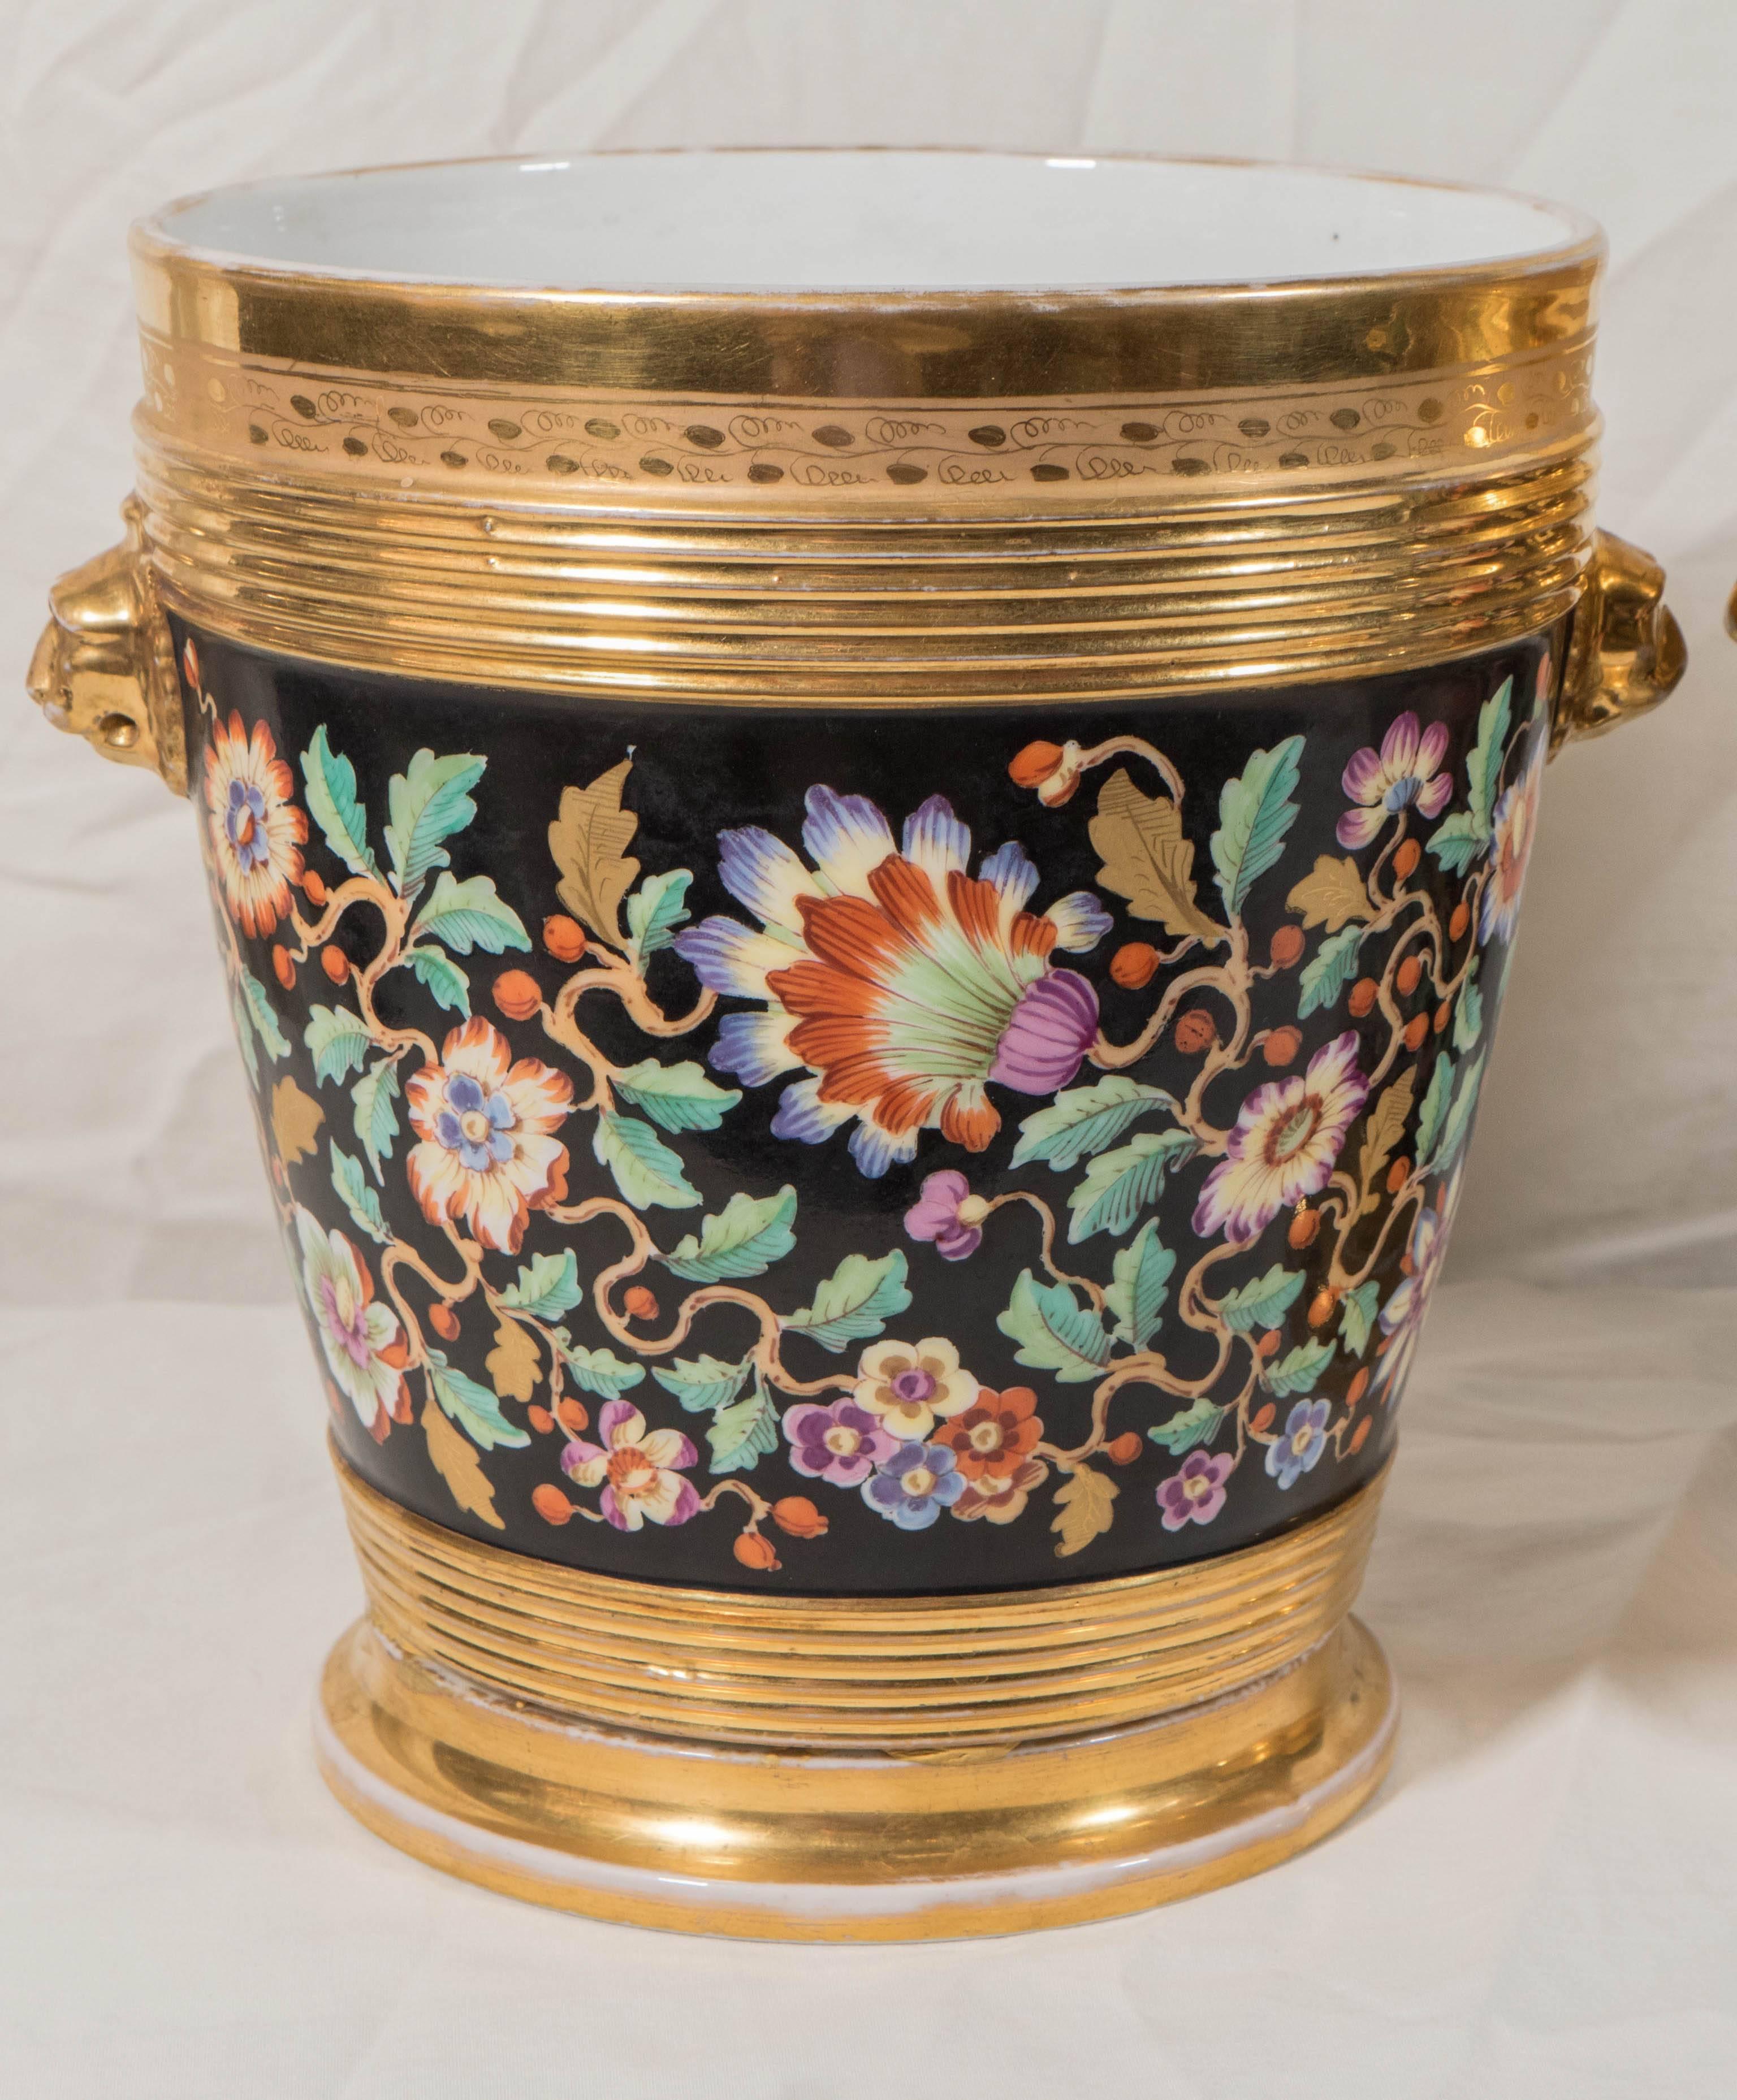 An important pair of early 19th century cache pots painted with vibrant colors showing a longtailed bird in a profusion of flowers on a black ground. The design is complemented by extensive gildng around the top, the base, and the lion's head